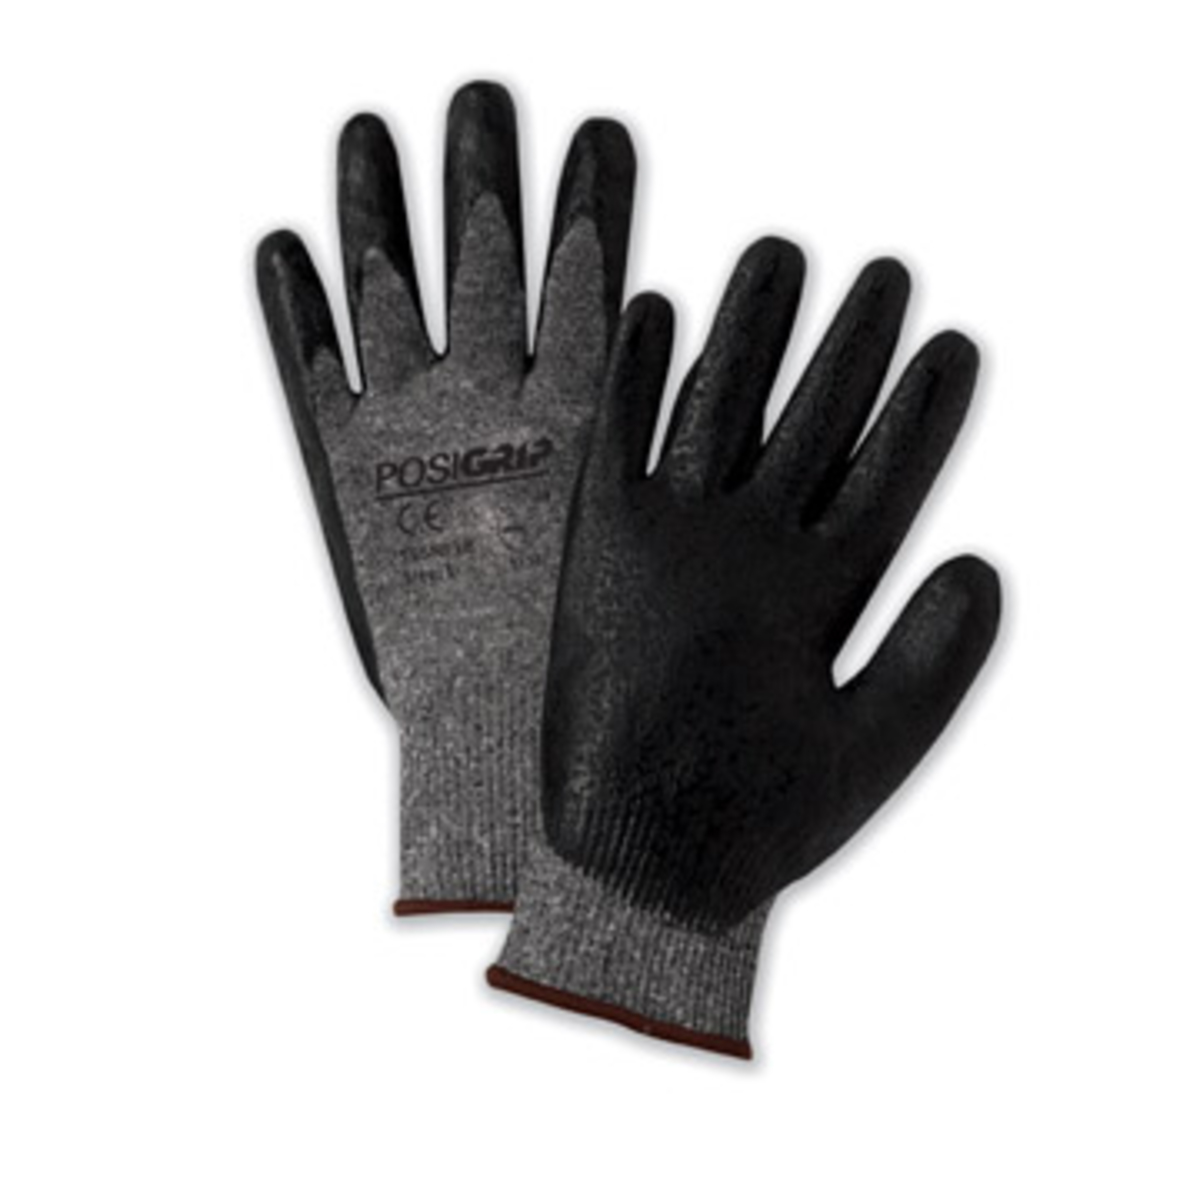 PIP® Medium PosiGrip® 15 Gauge Black Nitrile Palm And Finger Coated Work Gloves With Nylon Liner And Rib Knit Cuff